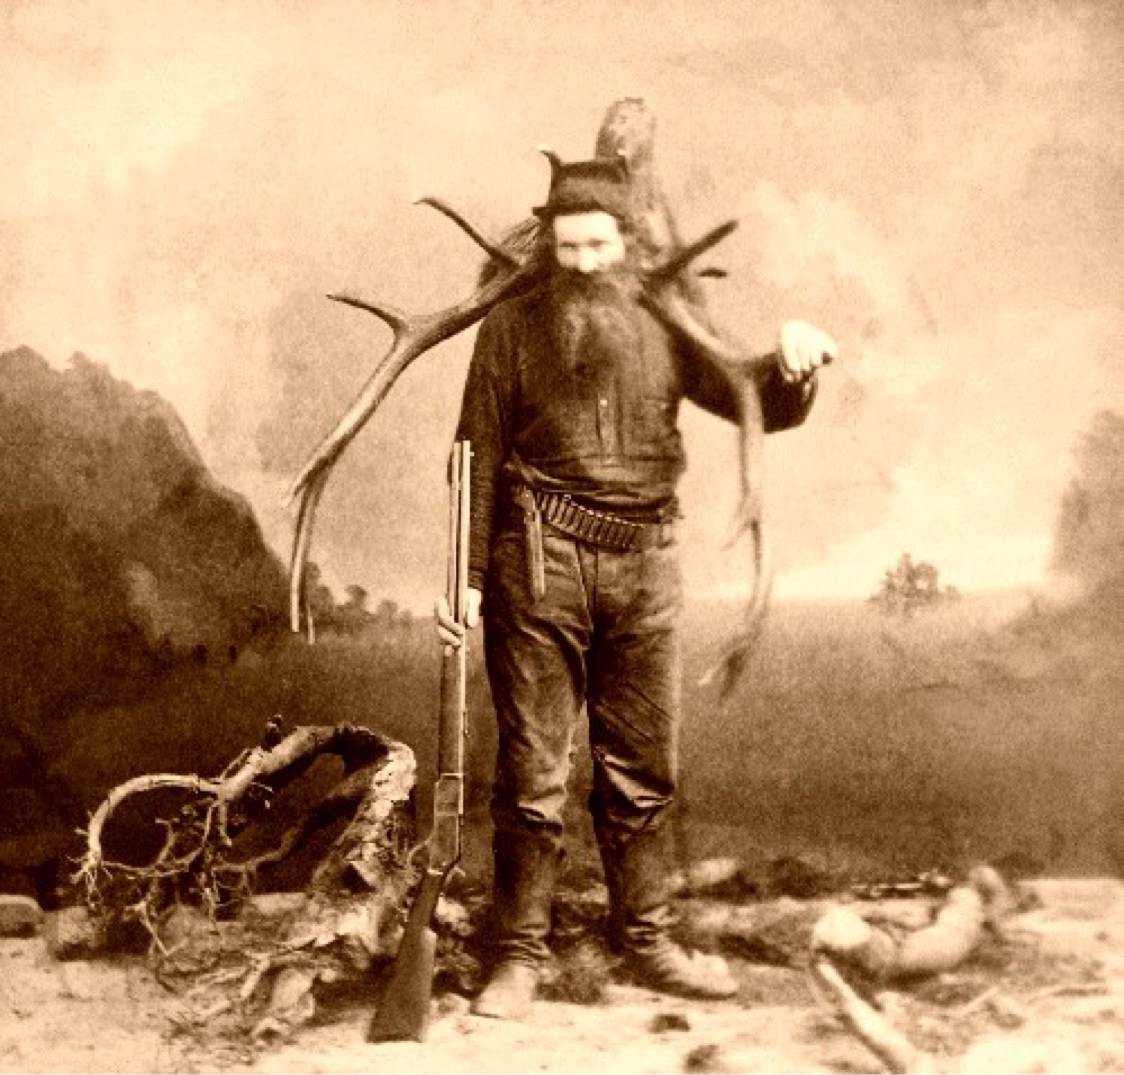 French trapper from the 19th century bringing home the goods. 